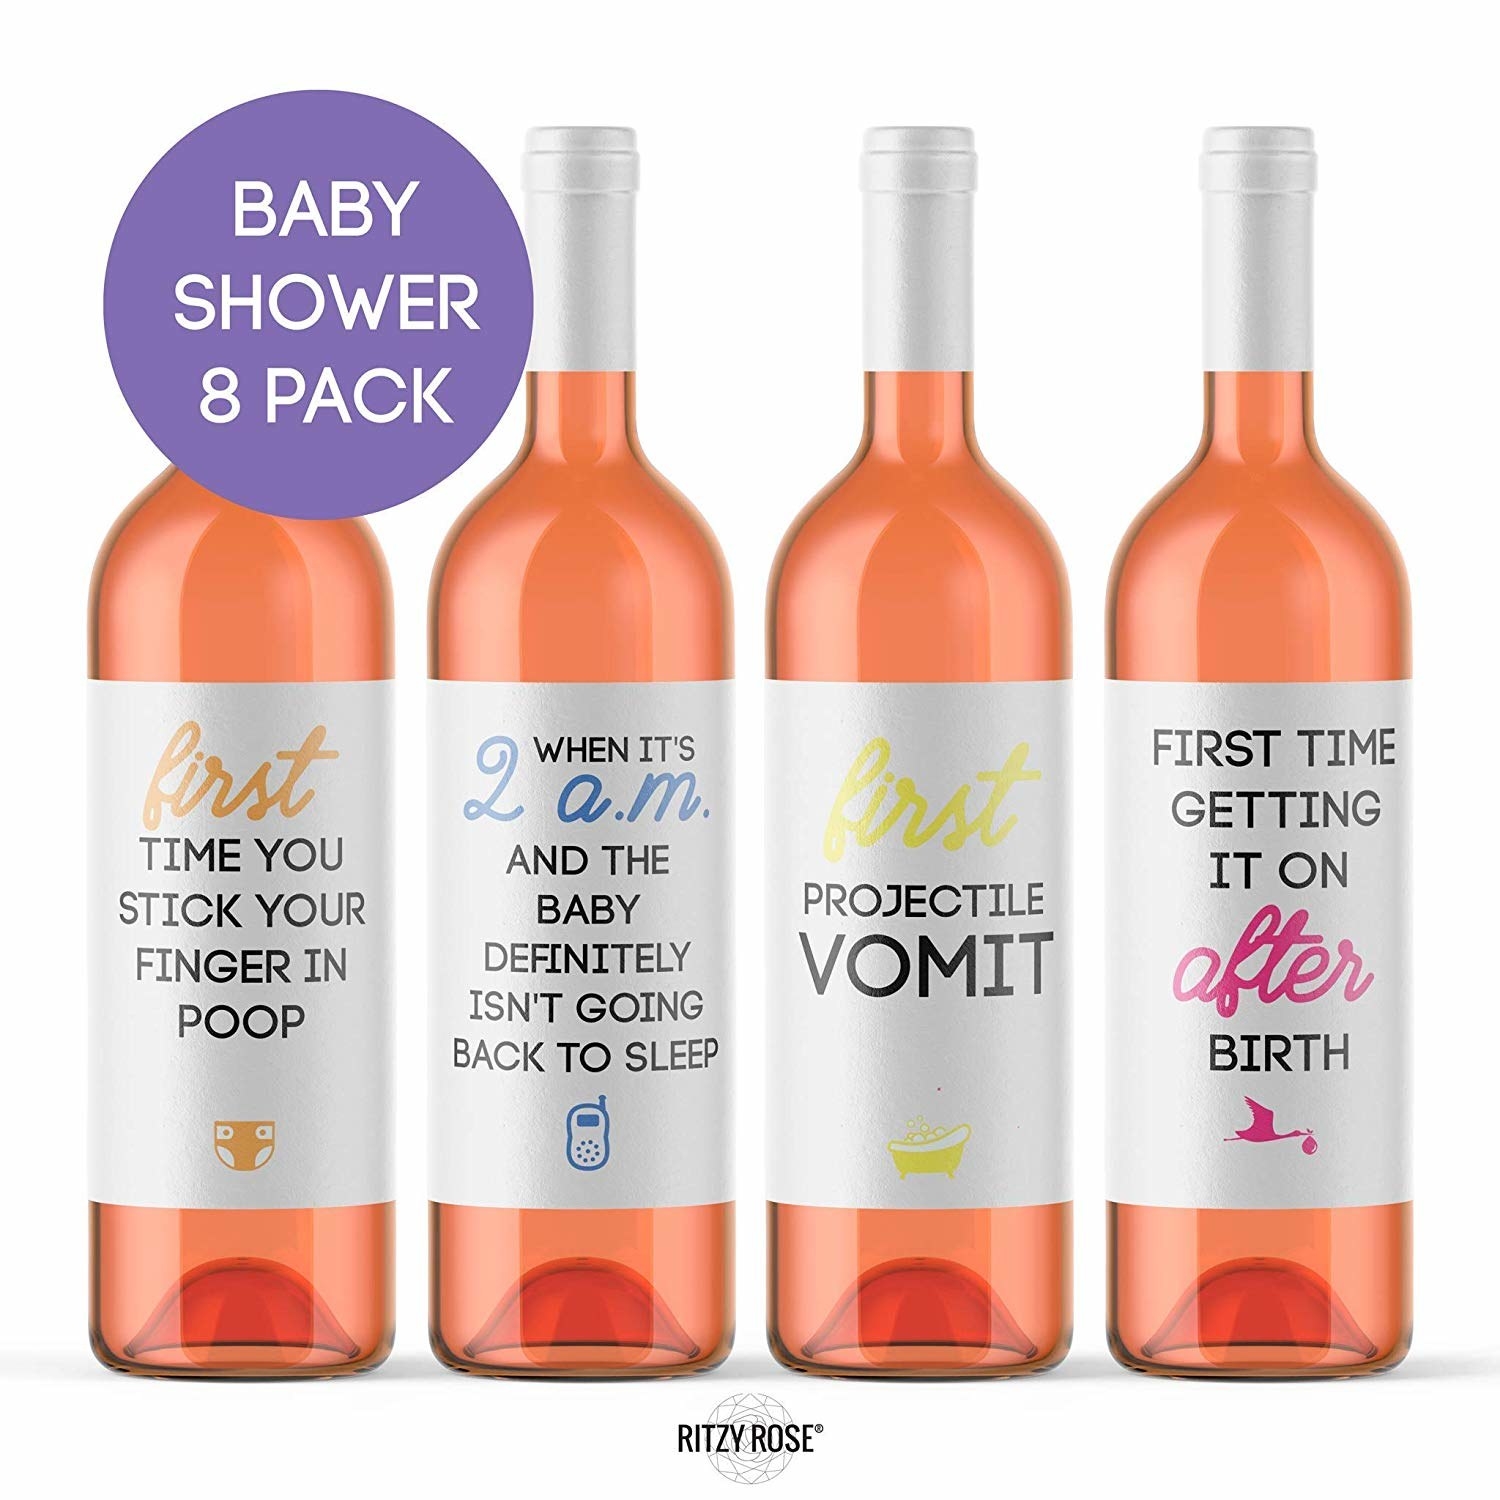 29 Baby Shower Gifts That Are Actually Fun